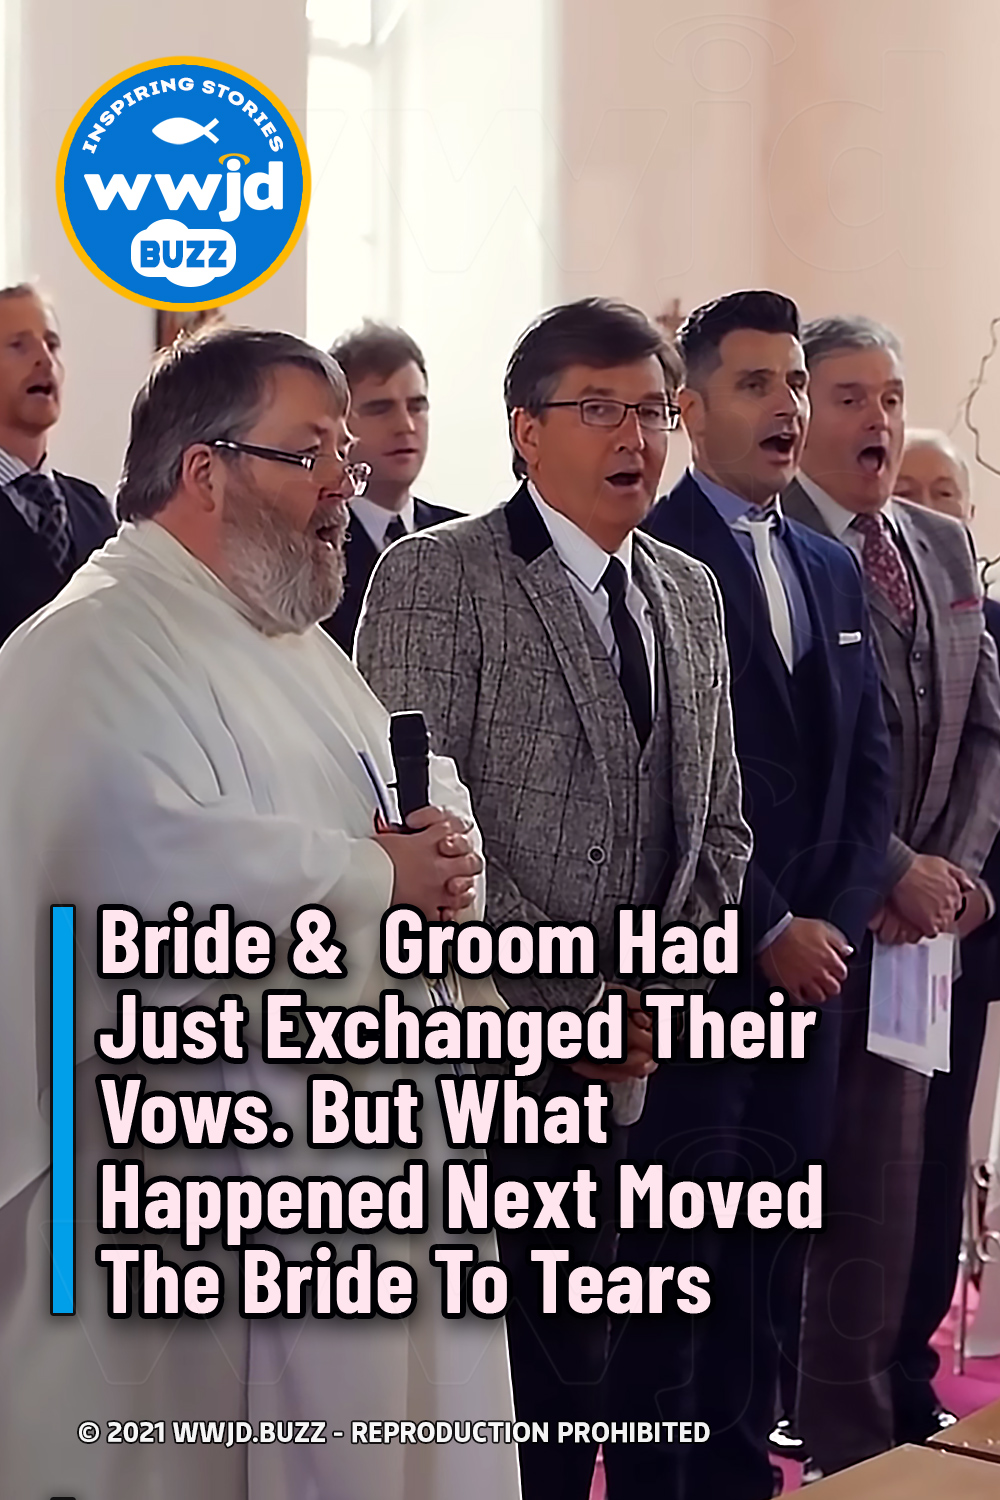 Bride &  Groom Had Just Exchanged Their Vows. But What Happened Next Moved The Bride To Tears